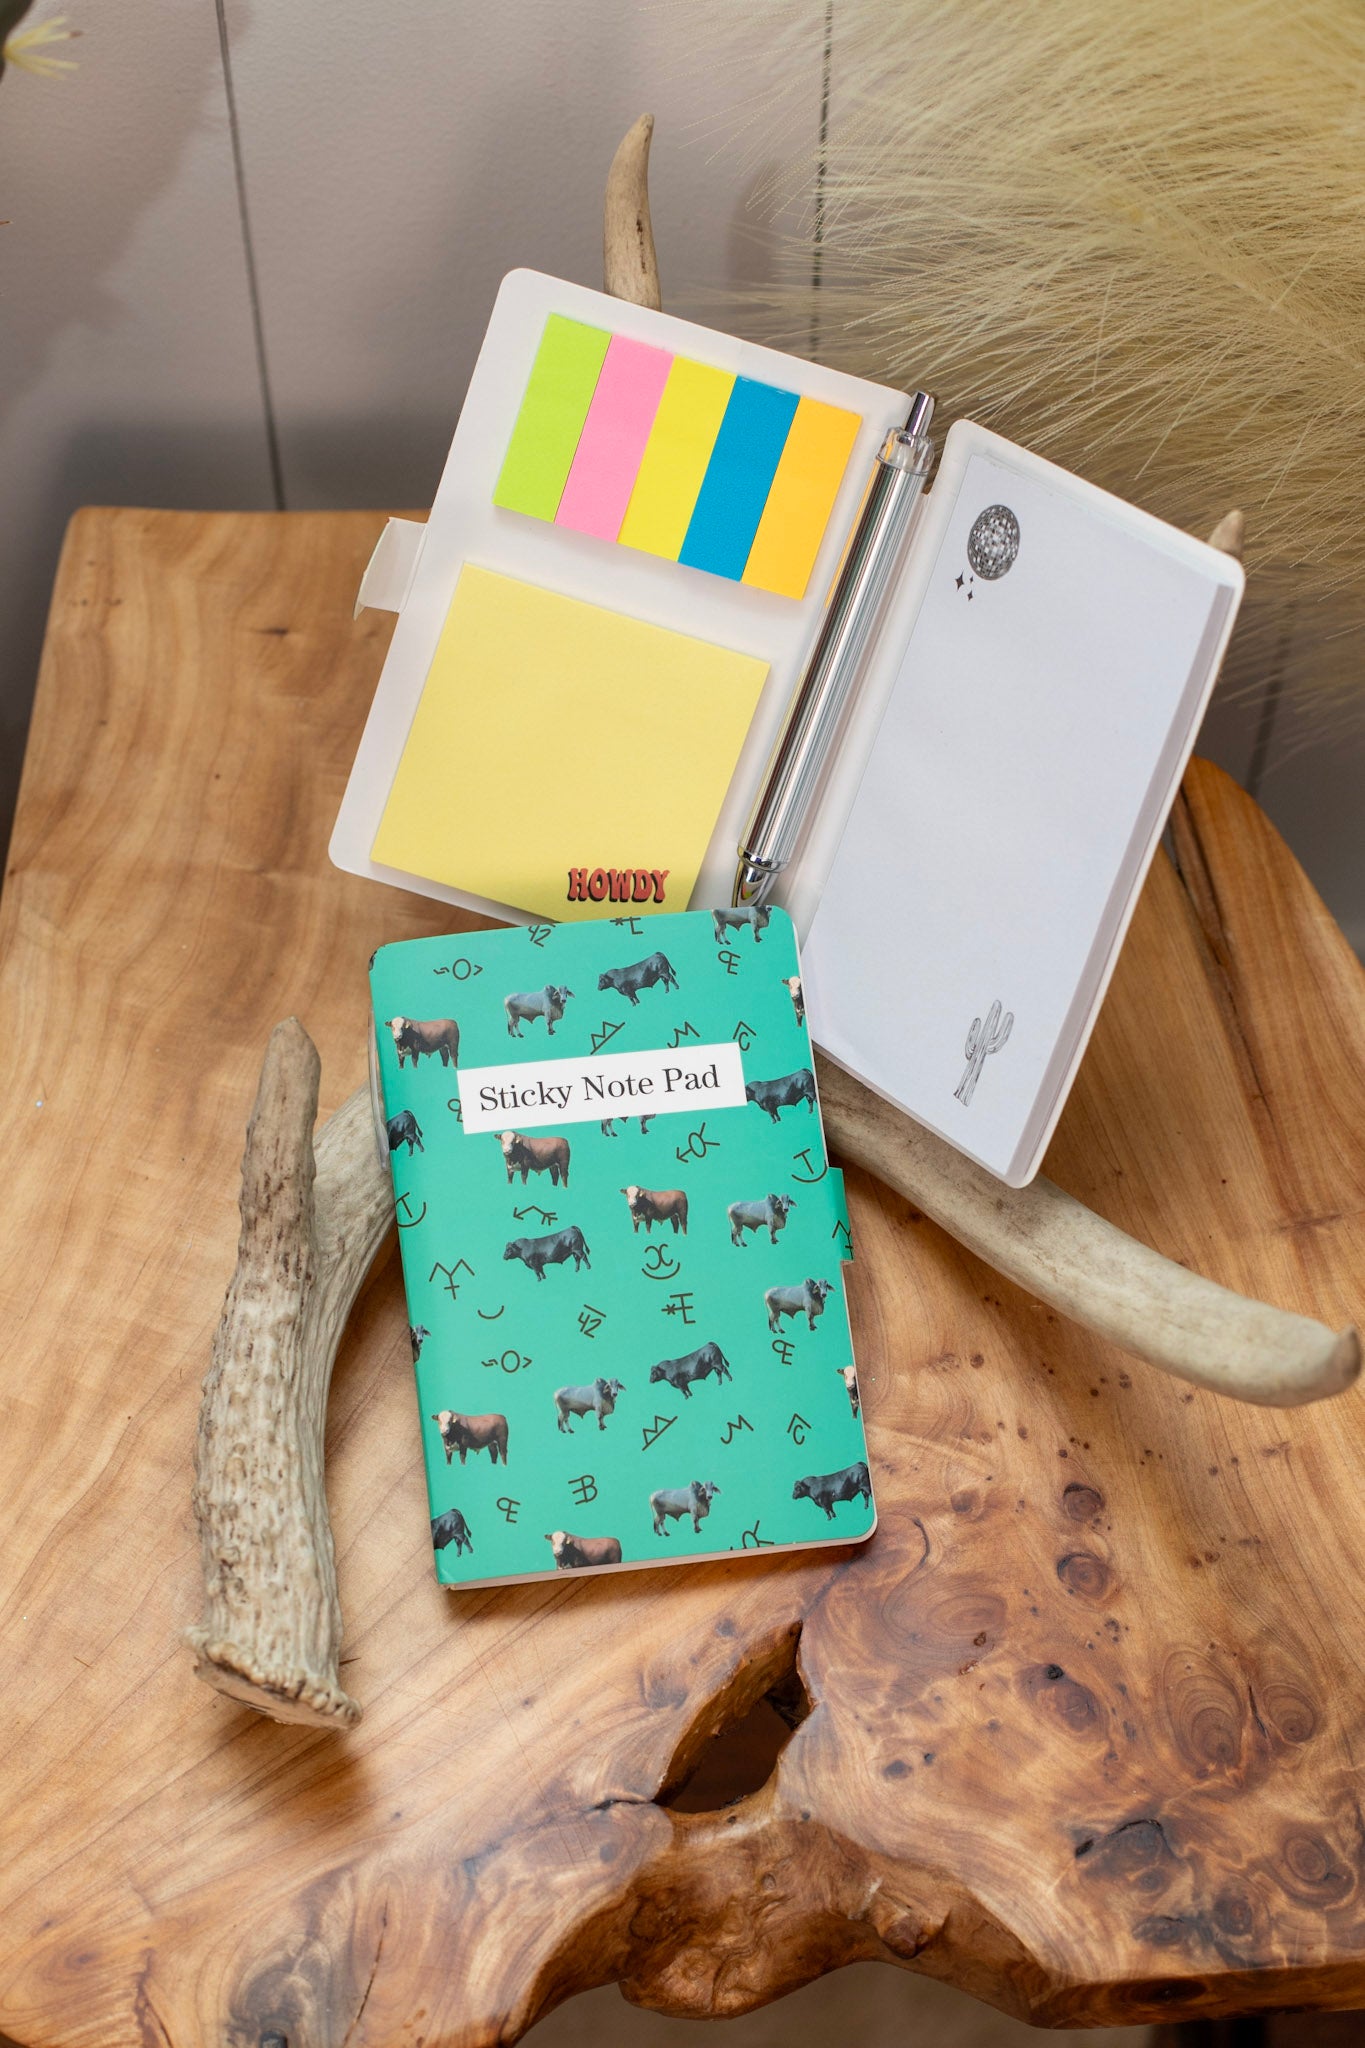 Sticky Note Pad Holder ~ Callin' Cattle